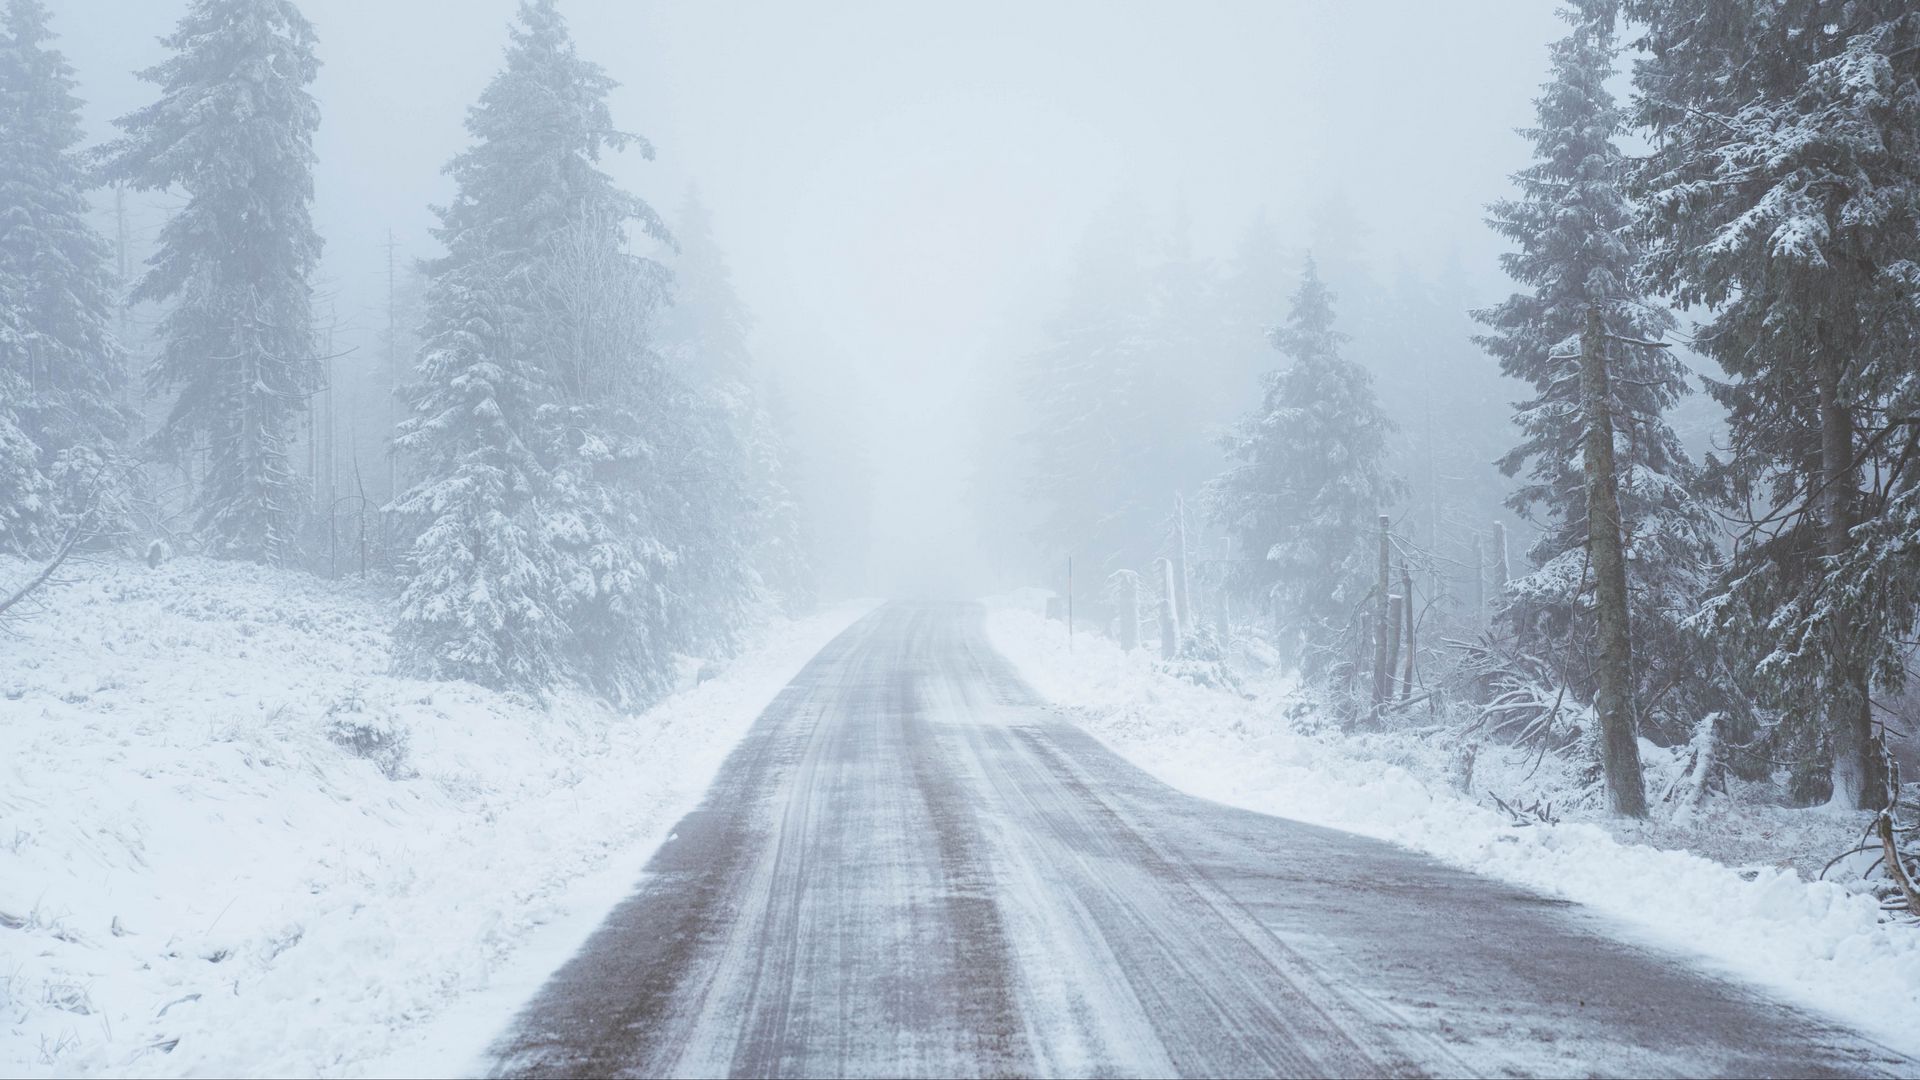 Download wallpaper 1920x1080 road, snow, blizzard, trees, winter full hd, hdtv, fhd, 1080p HD background